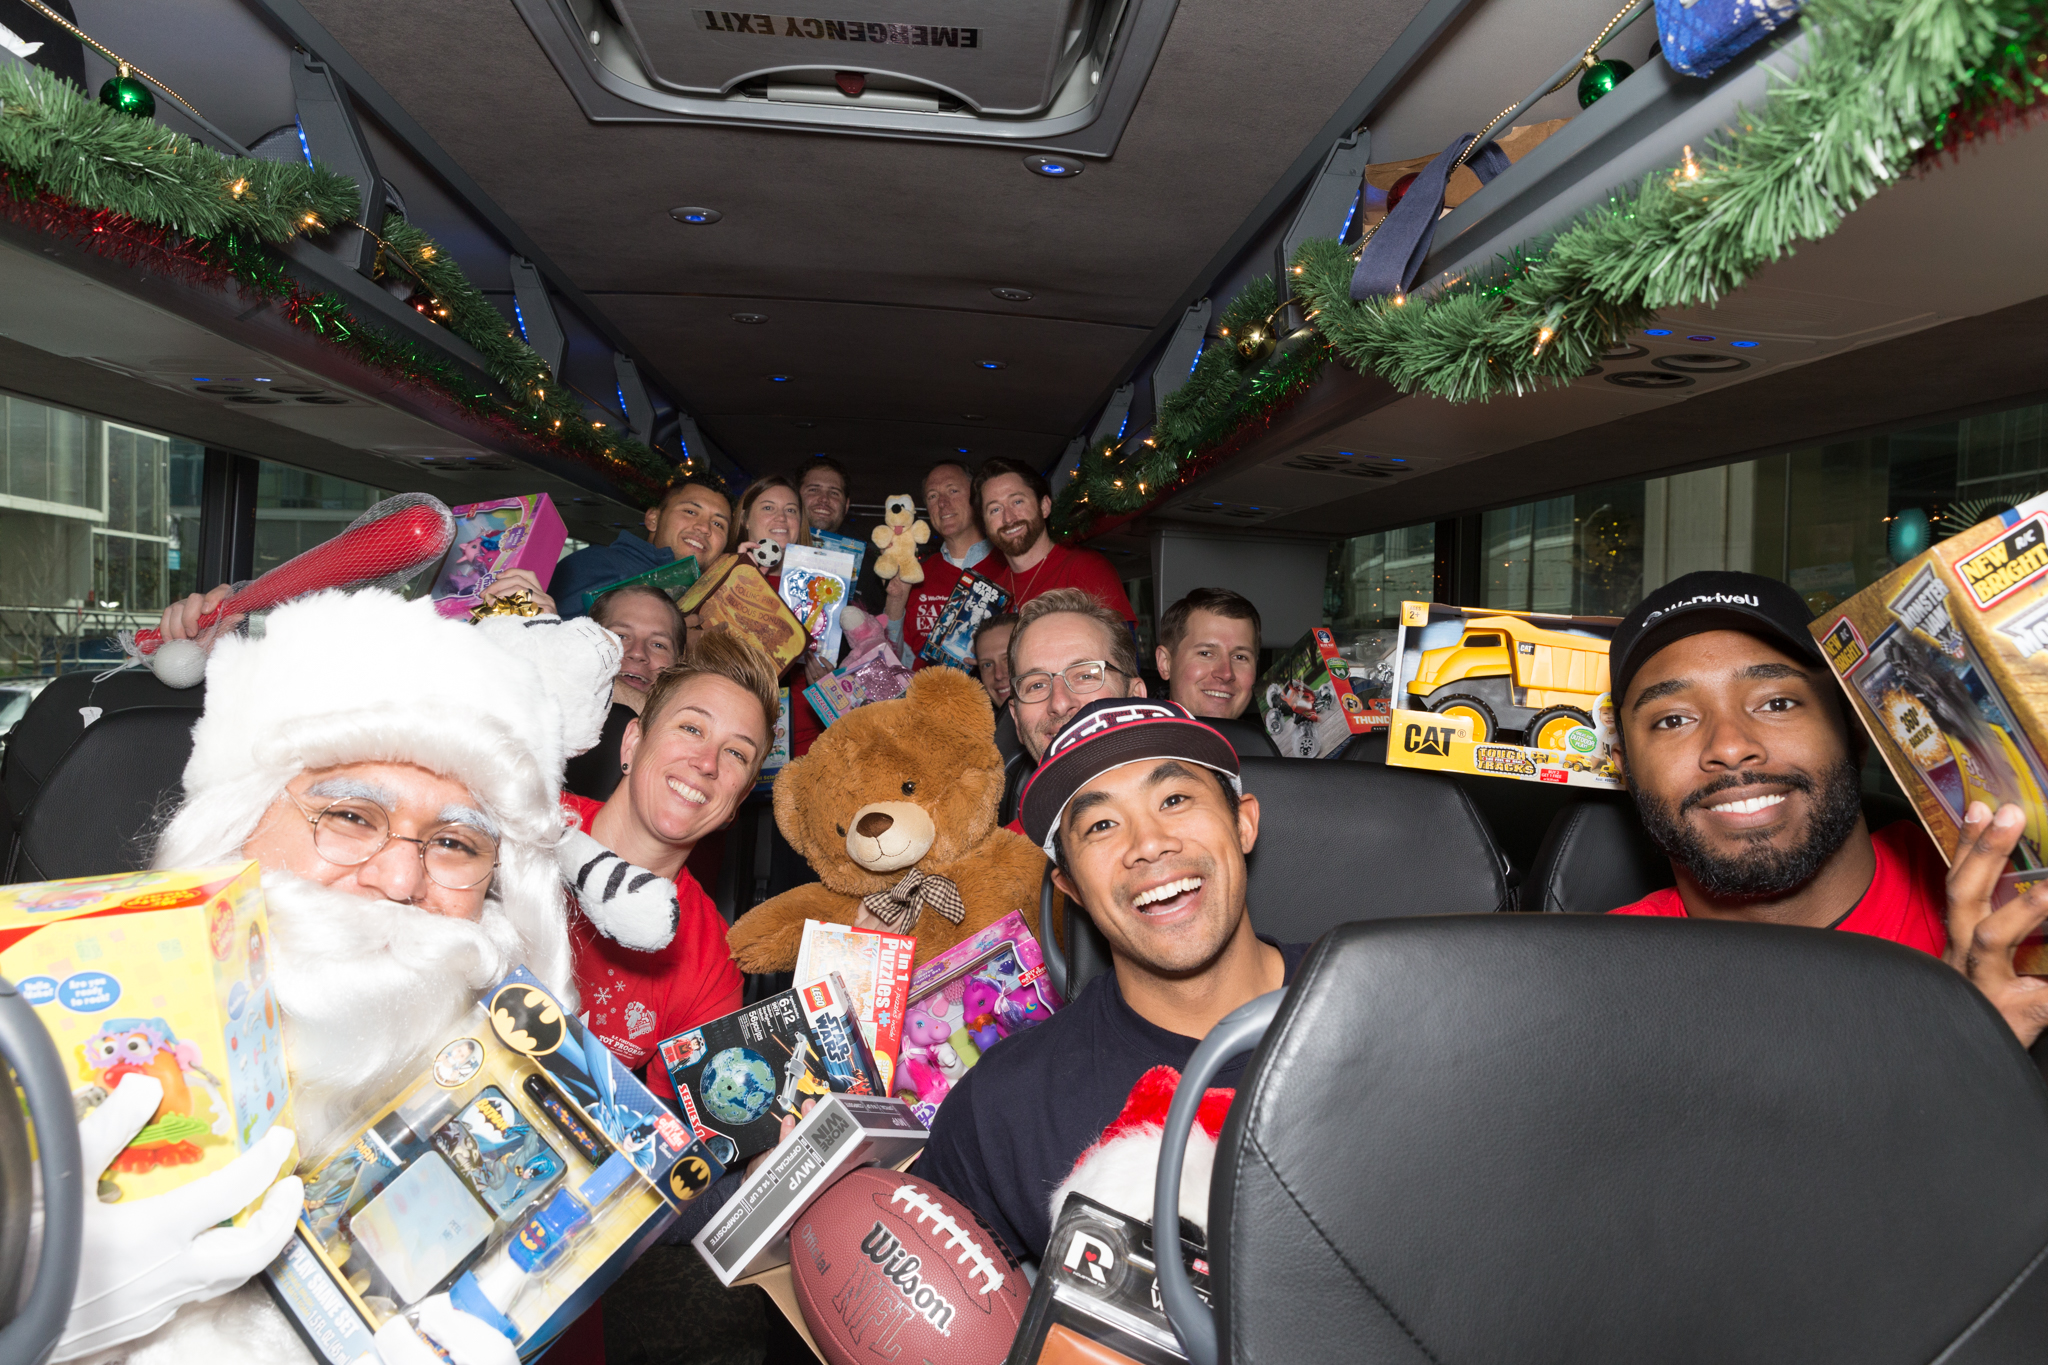 WeDriveU Stuff the Bus event at Salesforce San Francisco, CA benefiting SF Firefighters Toy Program 2016